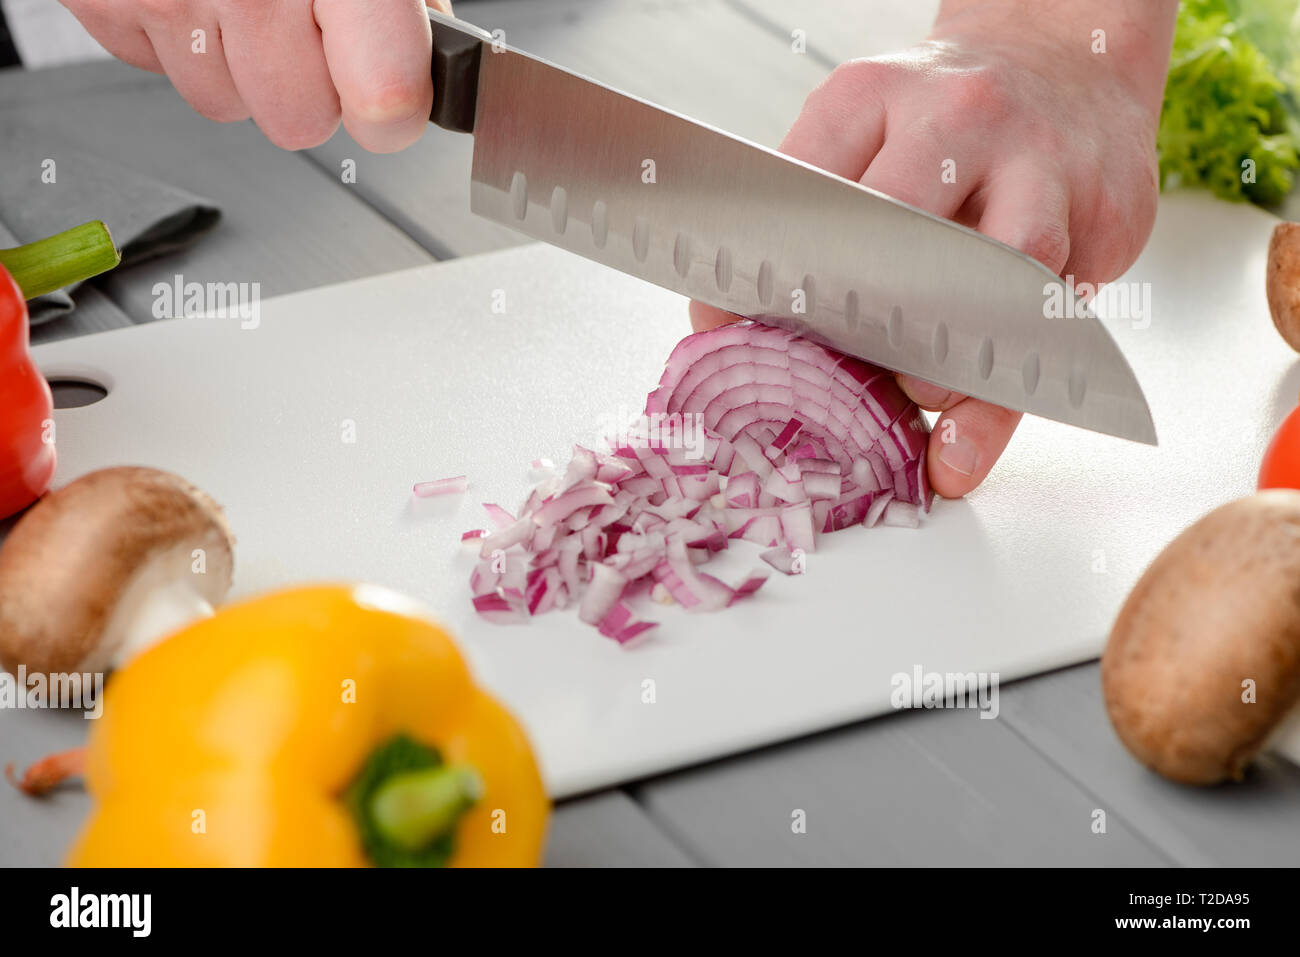 https://c8.alamy.com/comp/T2DA95/man-chopping-a-red-onion-into-medium-dice-using-a-chefs-knife-cutting-veggie-ingredients-on-a-white-board-kitchen-and-cooking-T2DA95.jpg